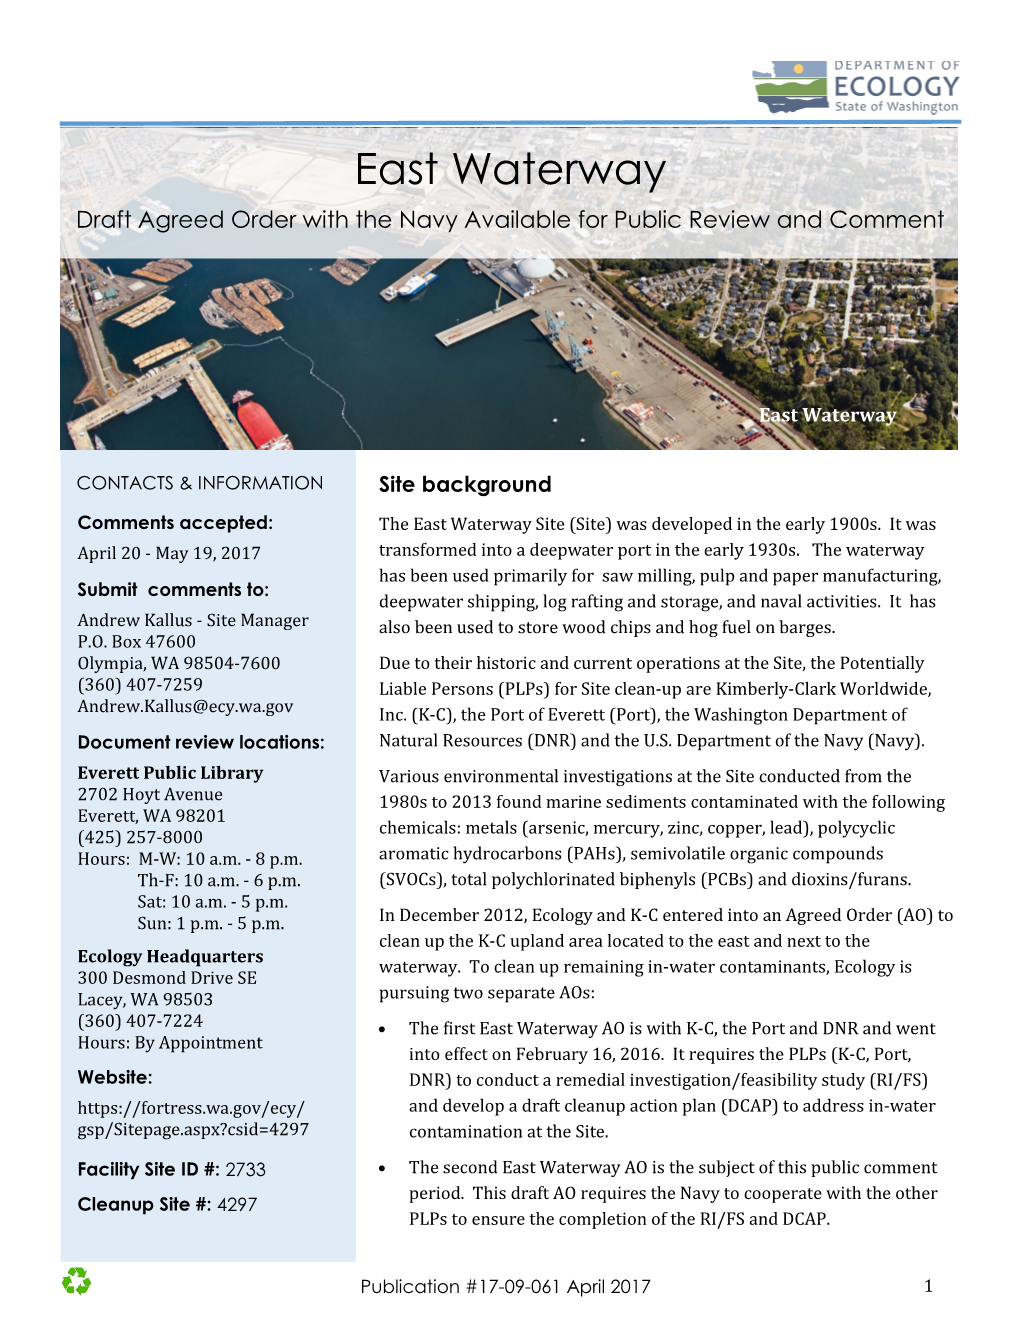 East Waterway Draft Agreed Order with the Navy Available for Public Review and Comment